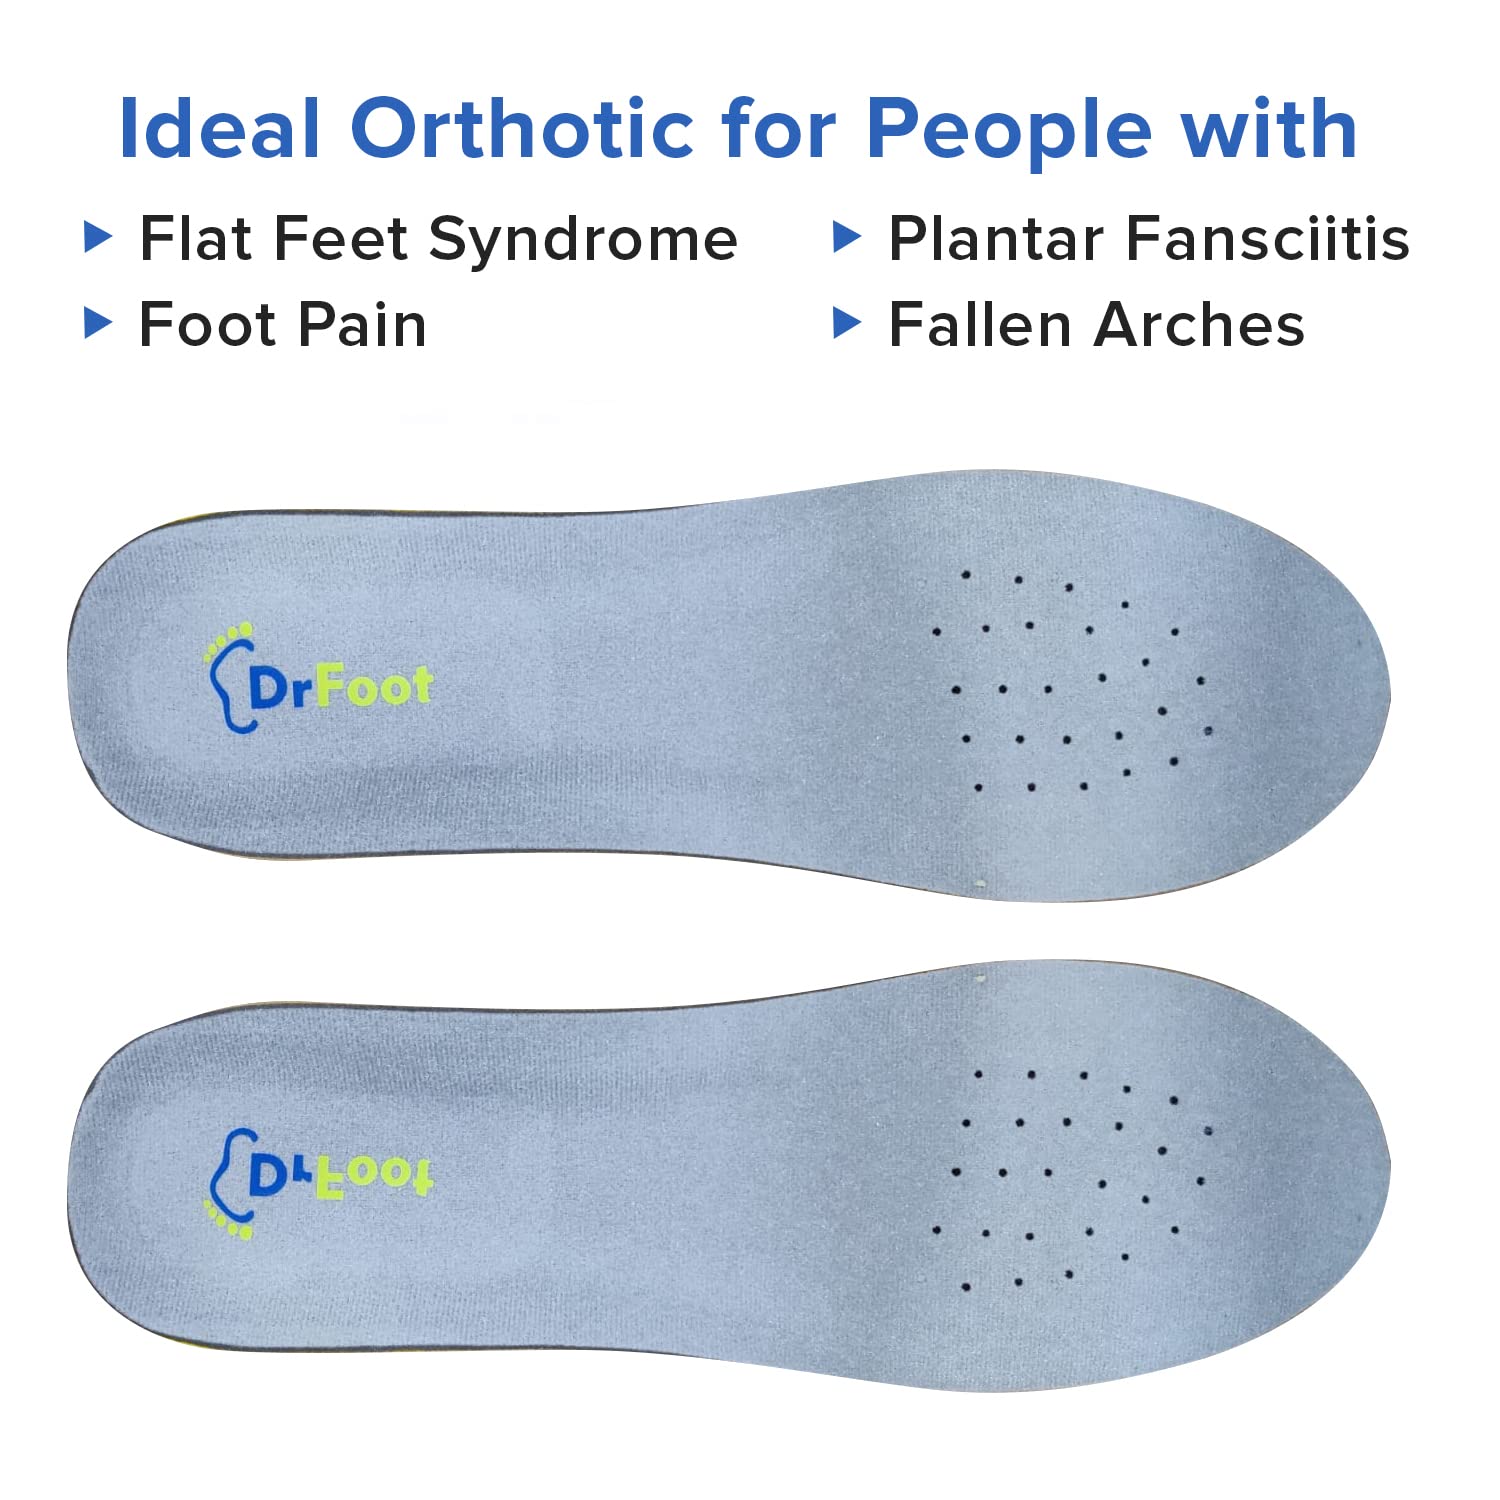 Dr Foot Gel Insoles Pair | For Walking, Running, Sports Shoes | All Day Comfort Shoe Inserts With Dual Gel Technology | Ideal Full-Length Sole For Every Shoe For Unisex- 1 Pair (Size - S) (Pack of 2)